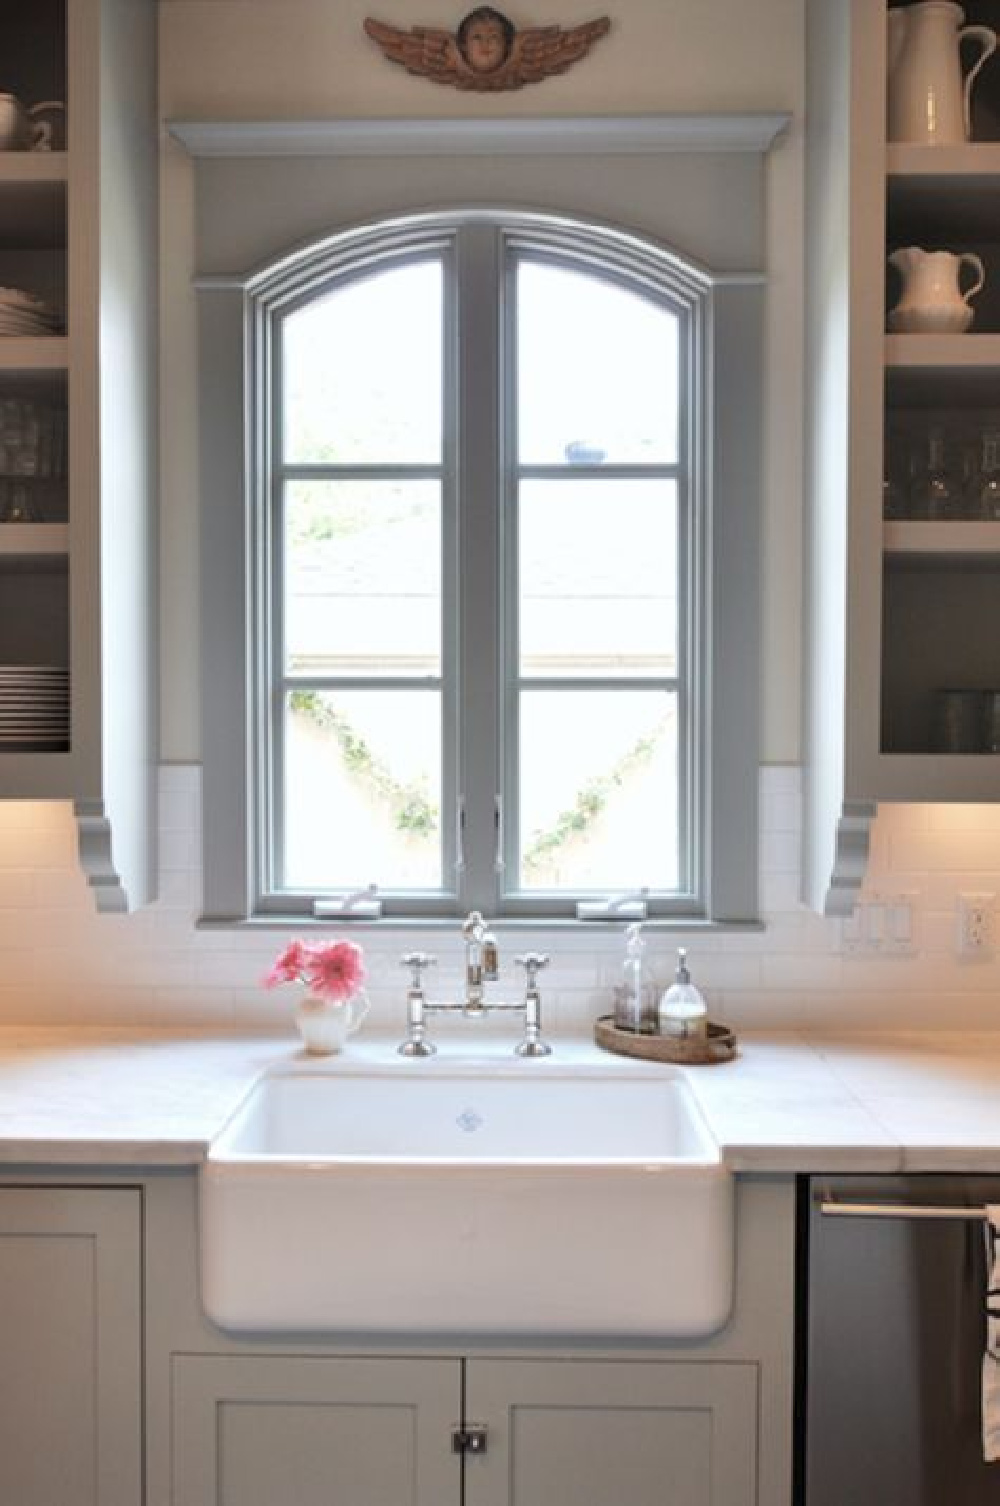 Beautiful arched window over farm sink in blue grey kitchen by Sally Wheat.